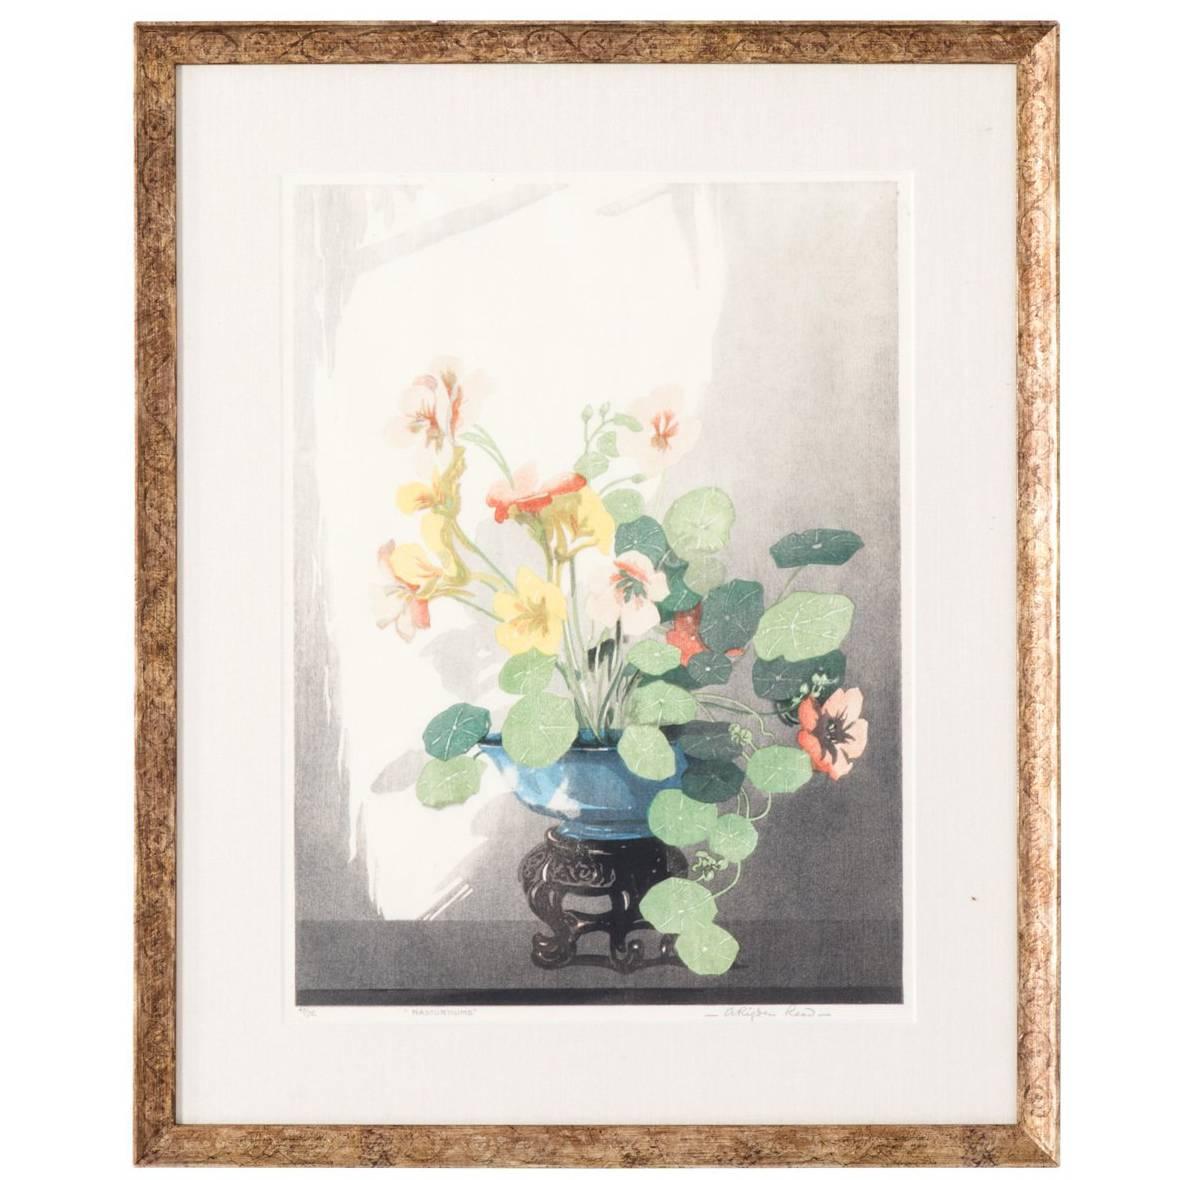 Wood Block Print of a Flower Bouquet by A.R. Read For Sale